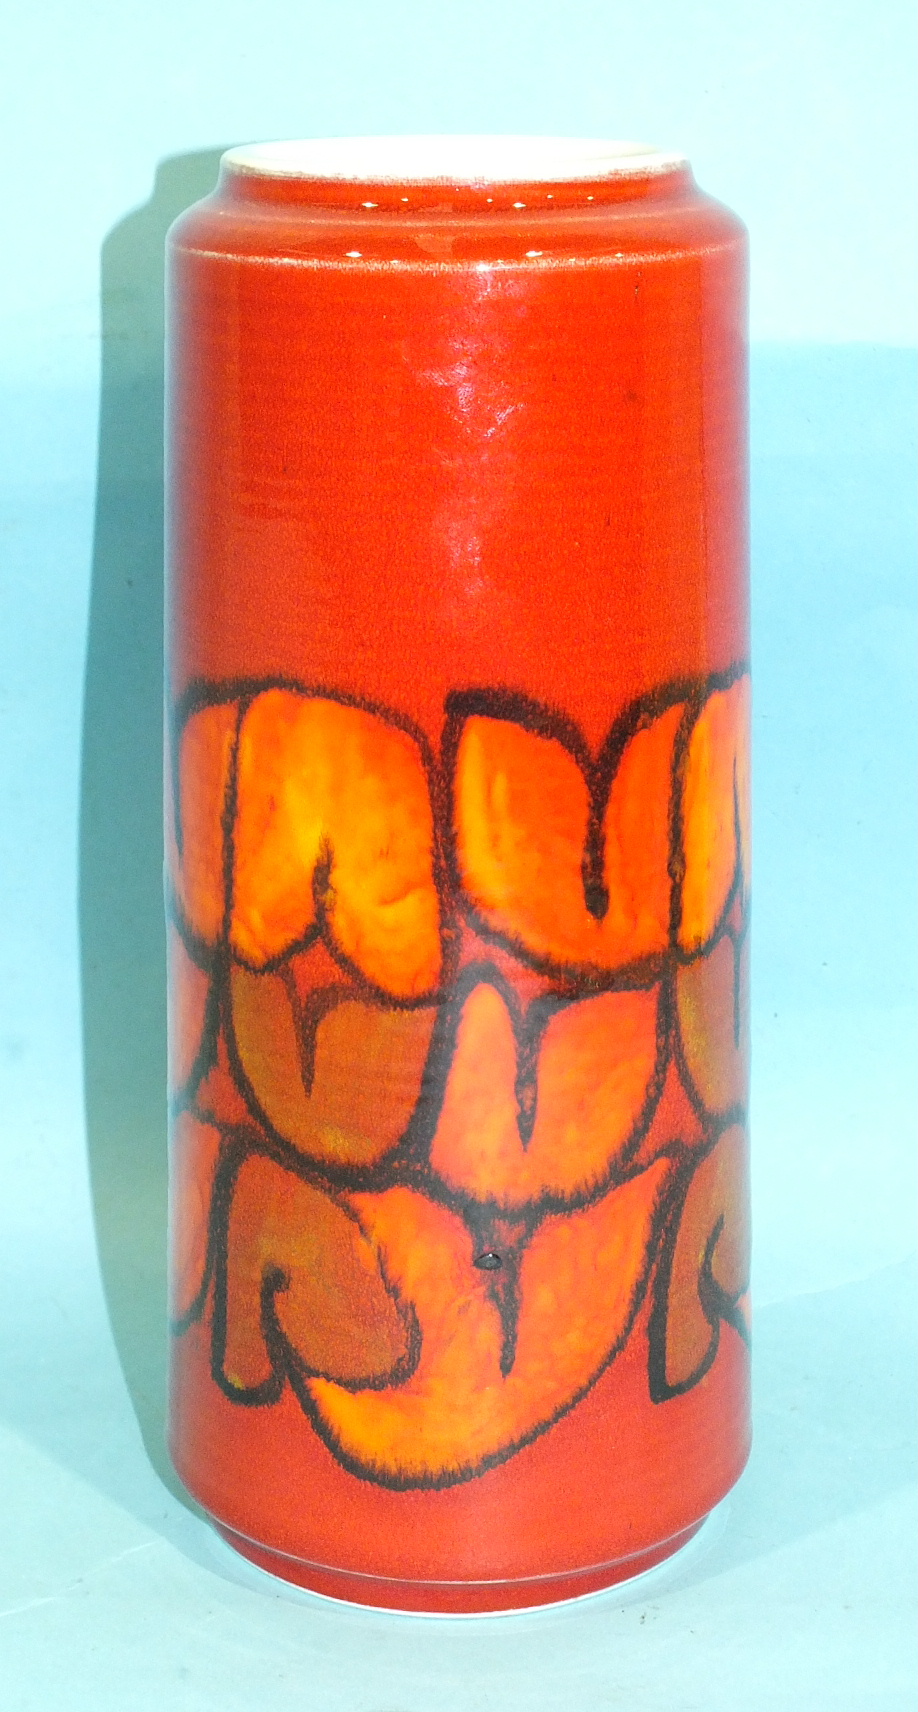 A Poole Pottery Delphis Ware vase of slightly-tapered cylindrical form, decorated in orange, black